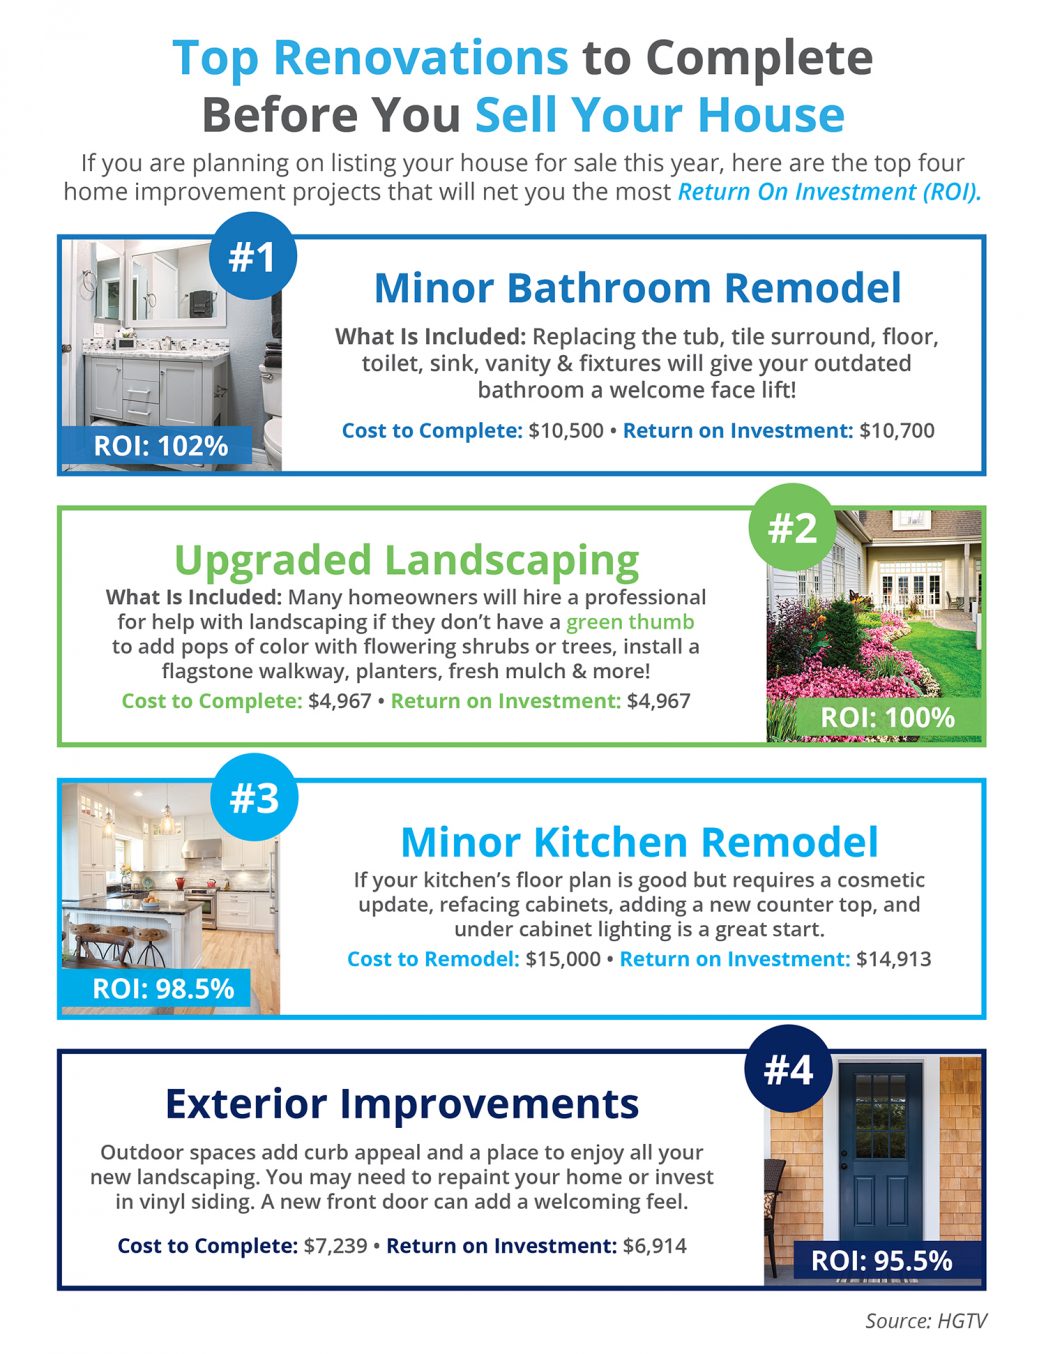 Top Renovations to Complete Before You Sell Your House